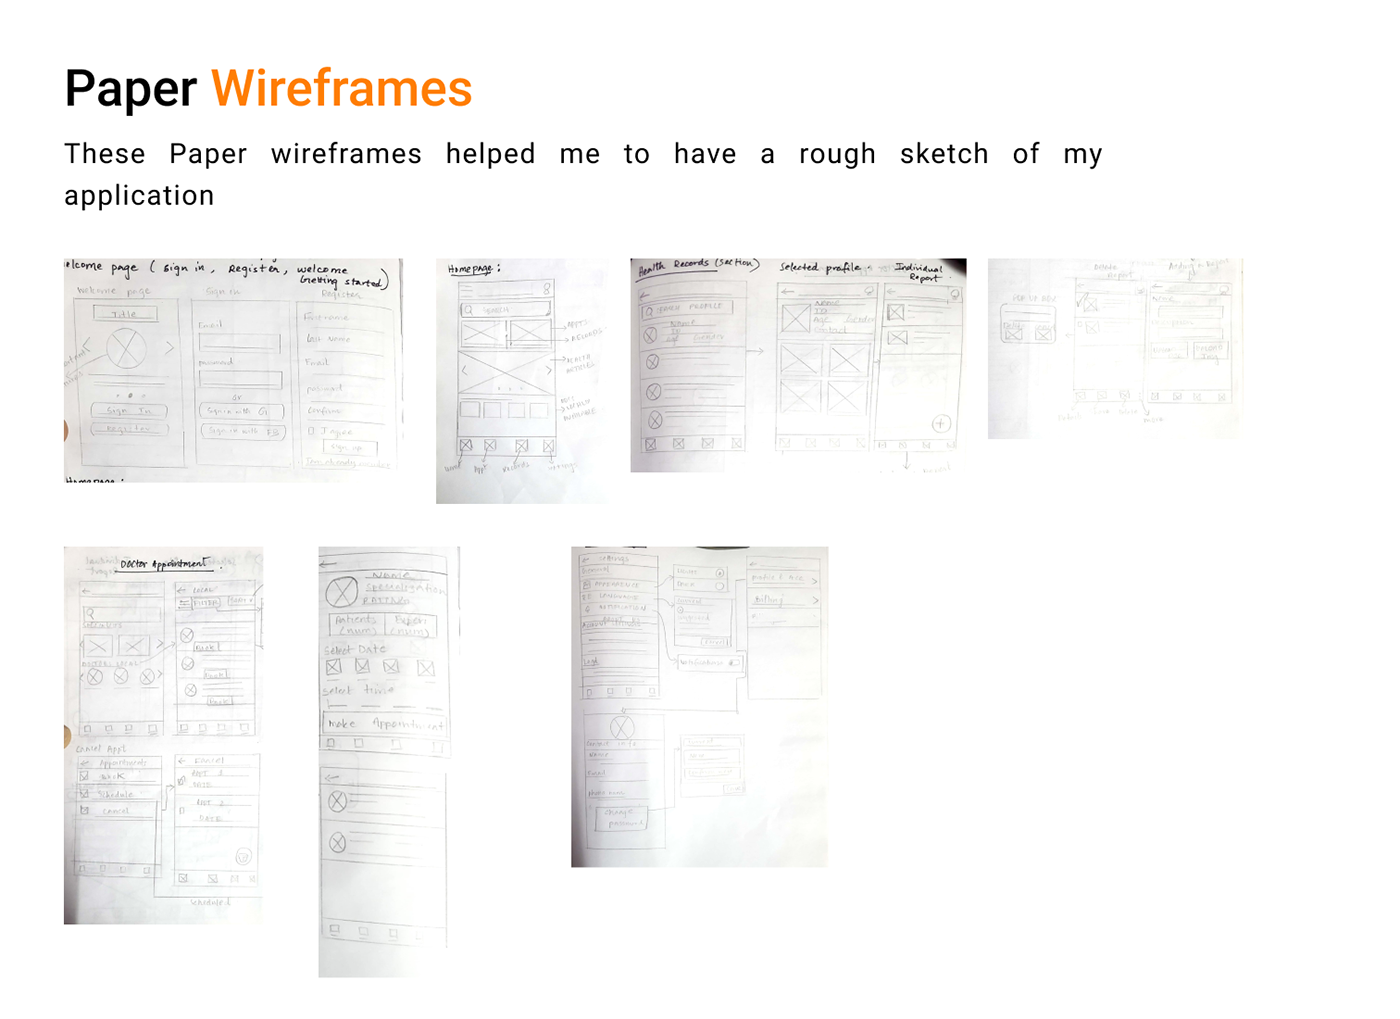 UX design wireframe prototype usability testing User research